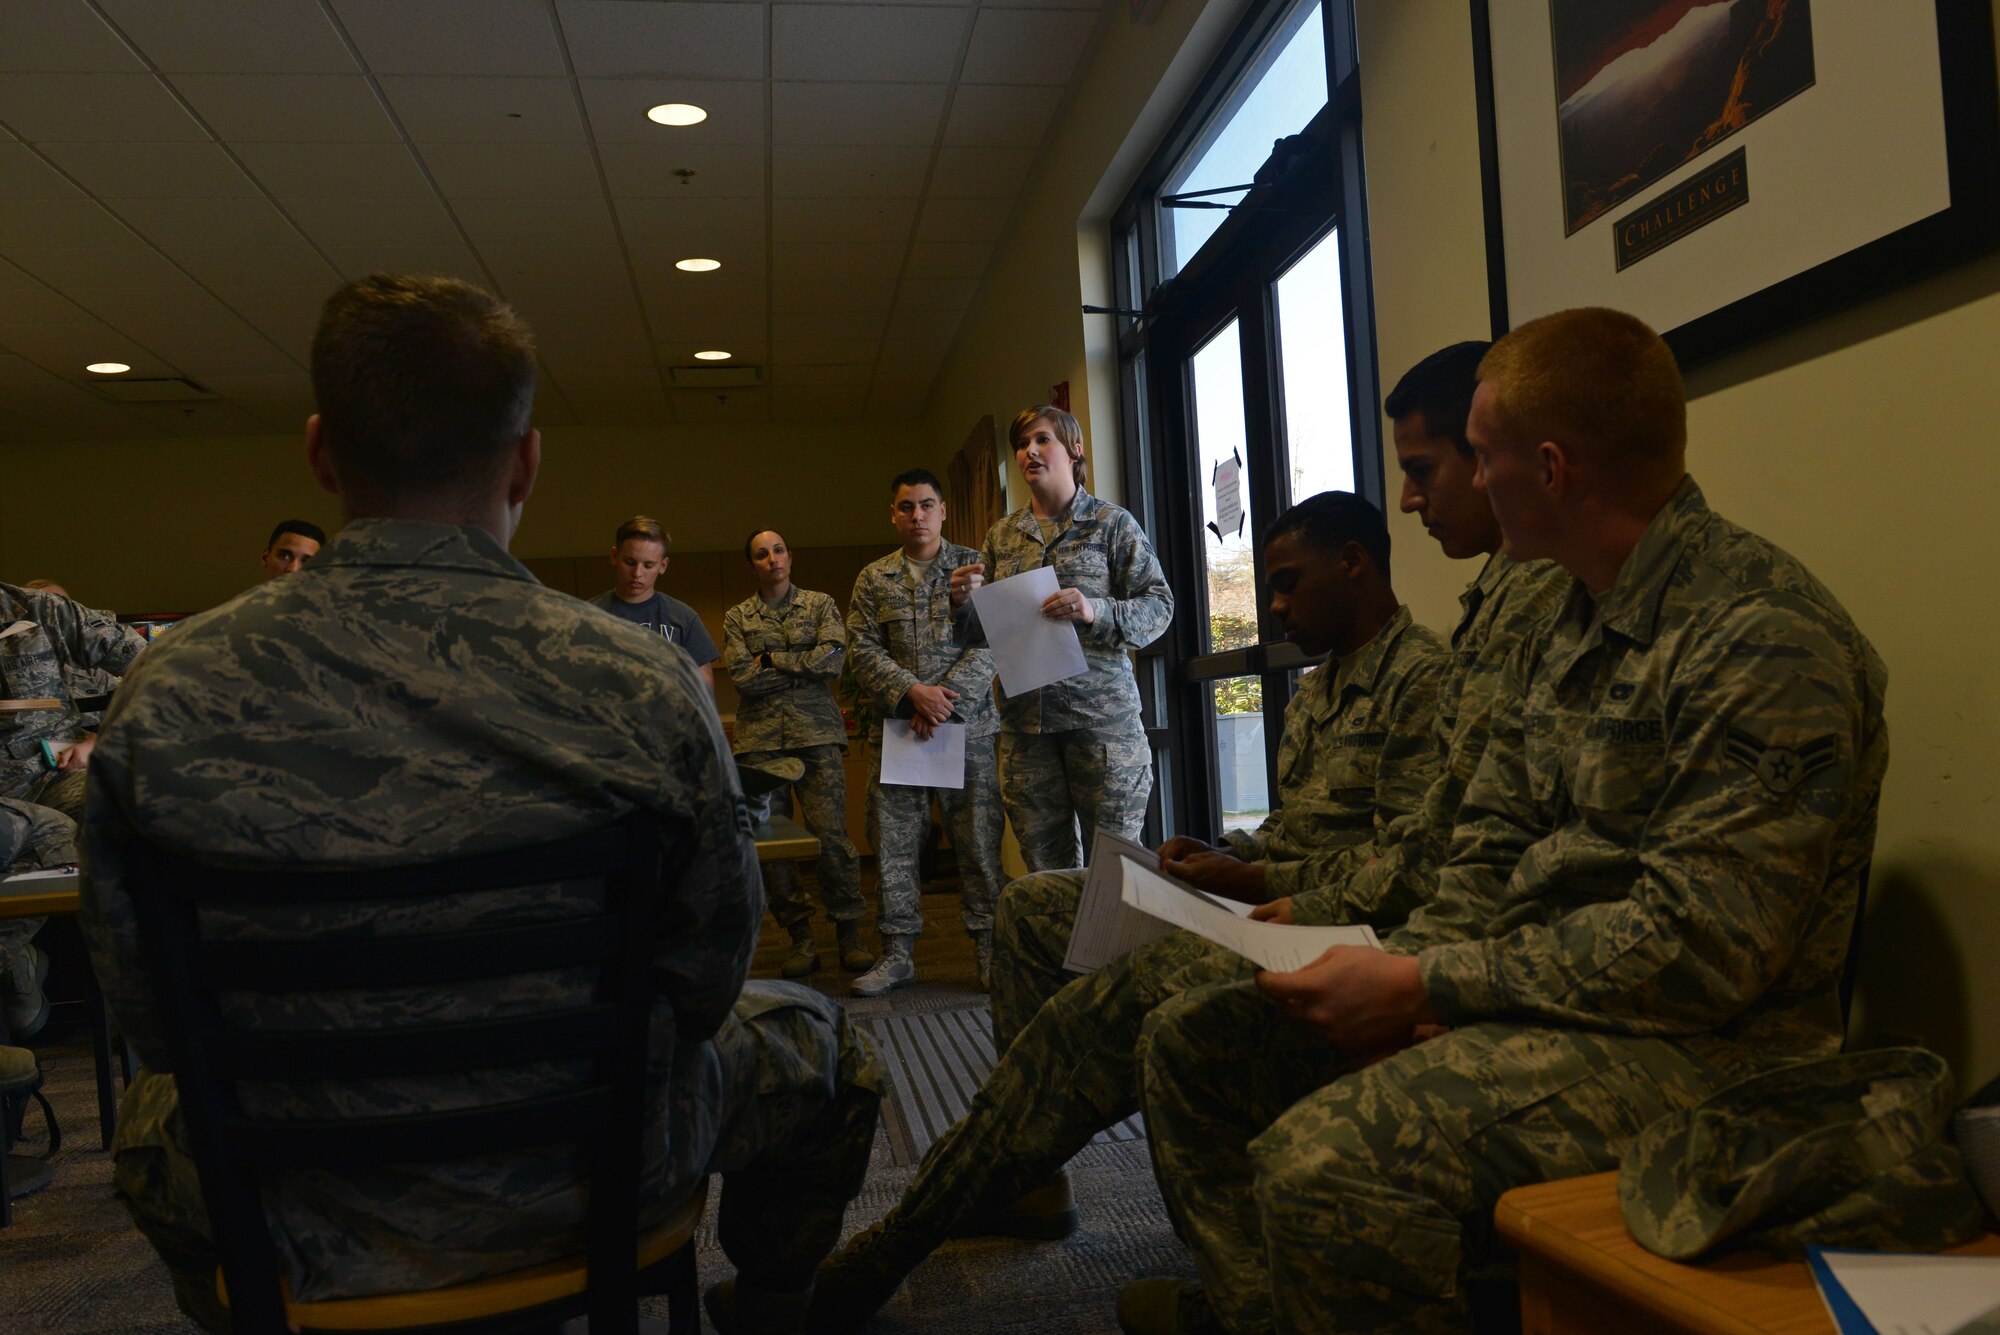 U.S. Air Force Senior Airman Moriah Garber, 20th Logistics Readiness Squadron commander support staff personnelist, speaks to Airmen during a Shaw Rising Four meeting about making senior airman below-the-zone at Shaw Air Force Base, S.C., Feb. 23, 2017. Garber and Senior Airman Andrea Raudales, 609th Air Communications Squadron commander support staff personnelist, previously treasurer and vice president of the Shaw Rising Four, are now the organization’s Shaw 5/6 mentors. (U.S. Air Force photo by Airman 1st Class Destinee Sweeney)